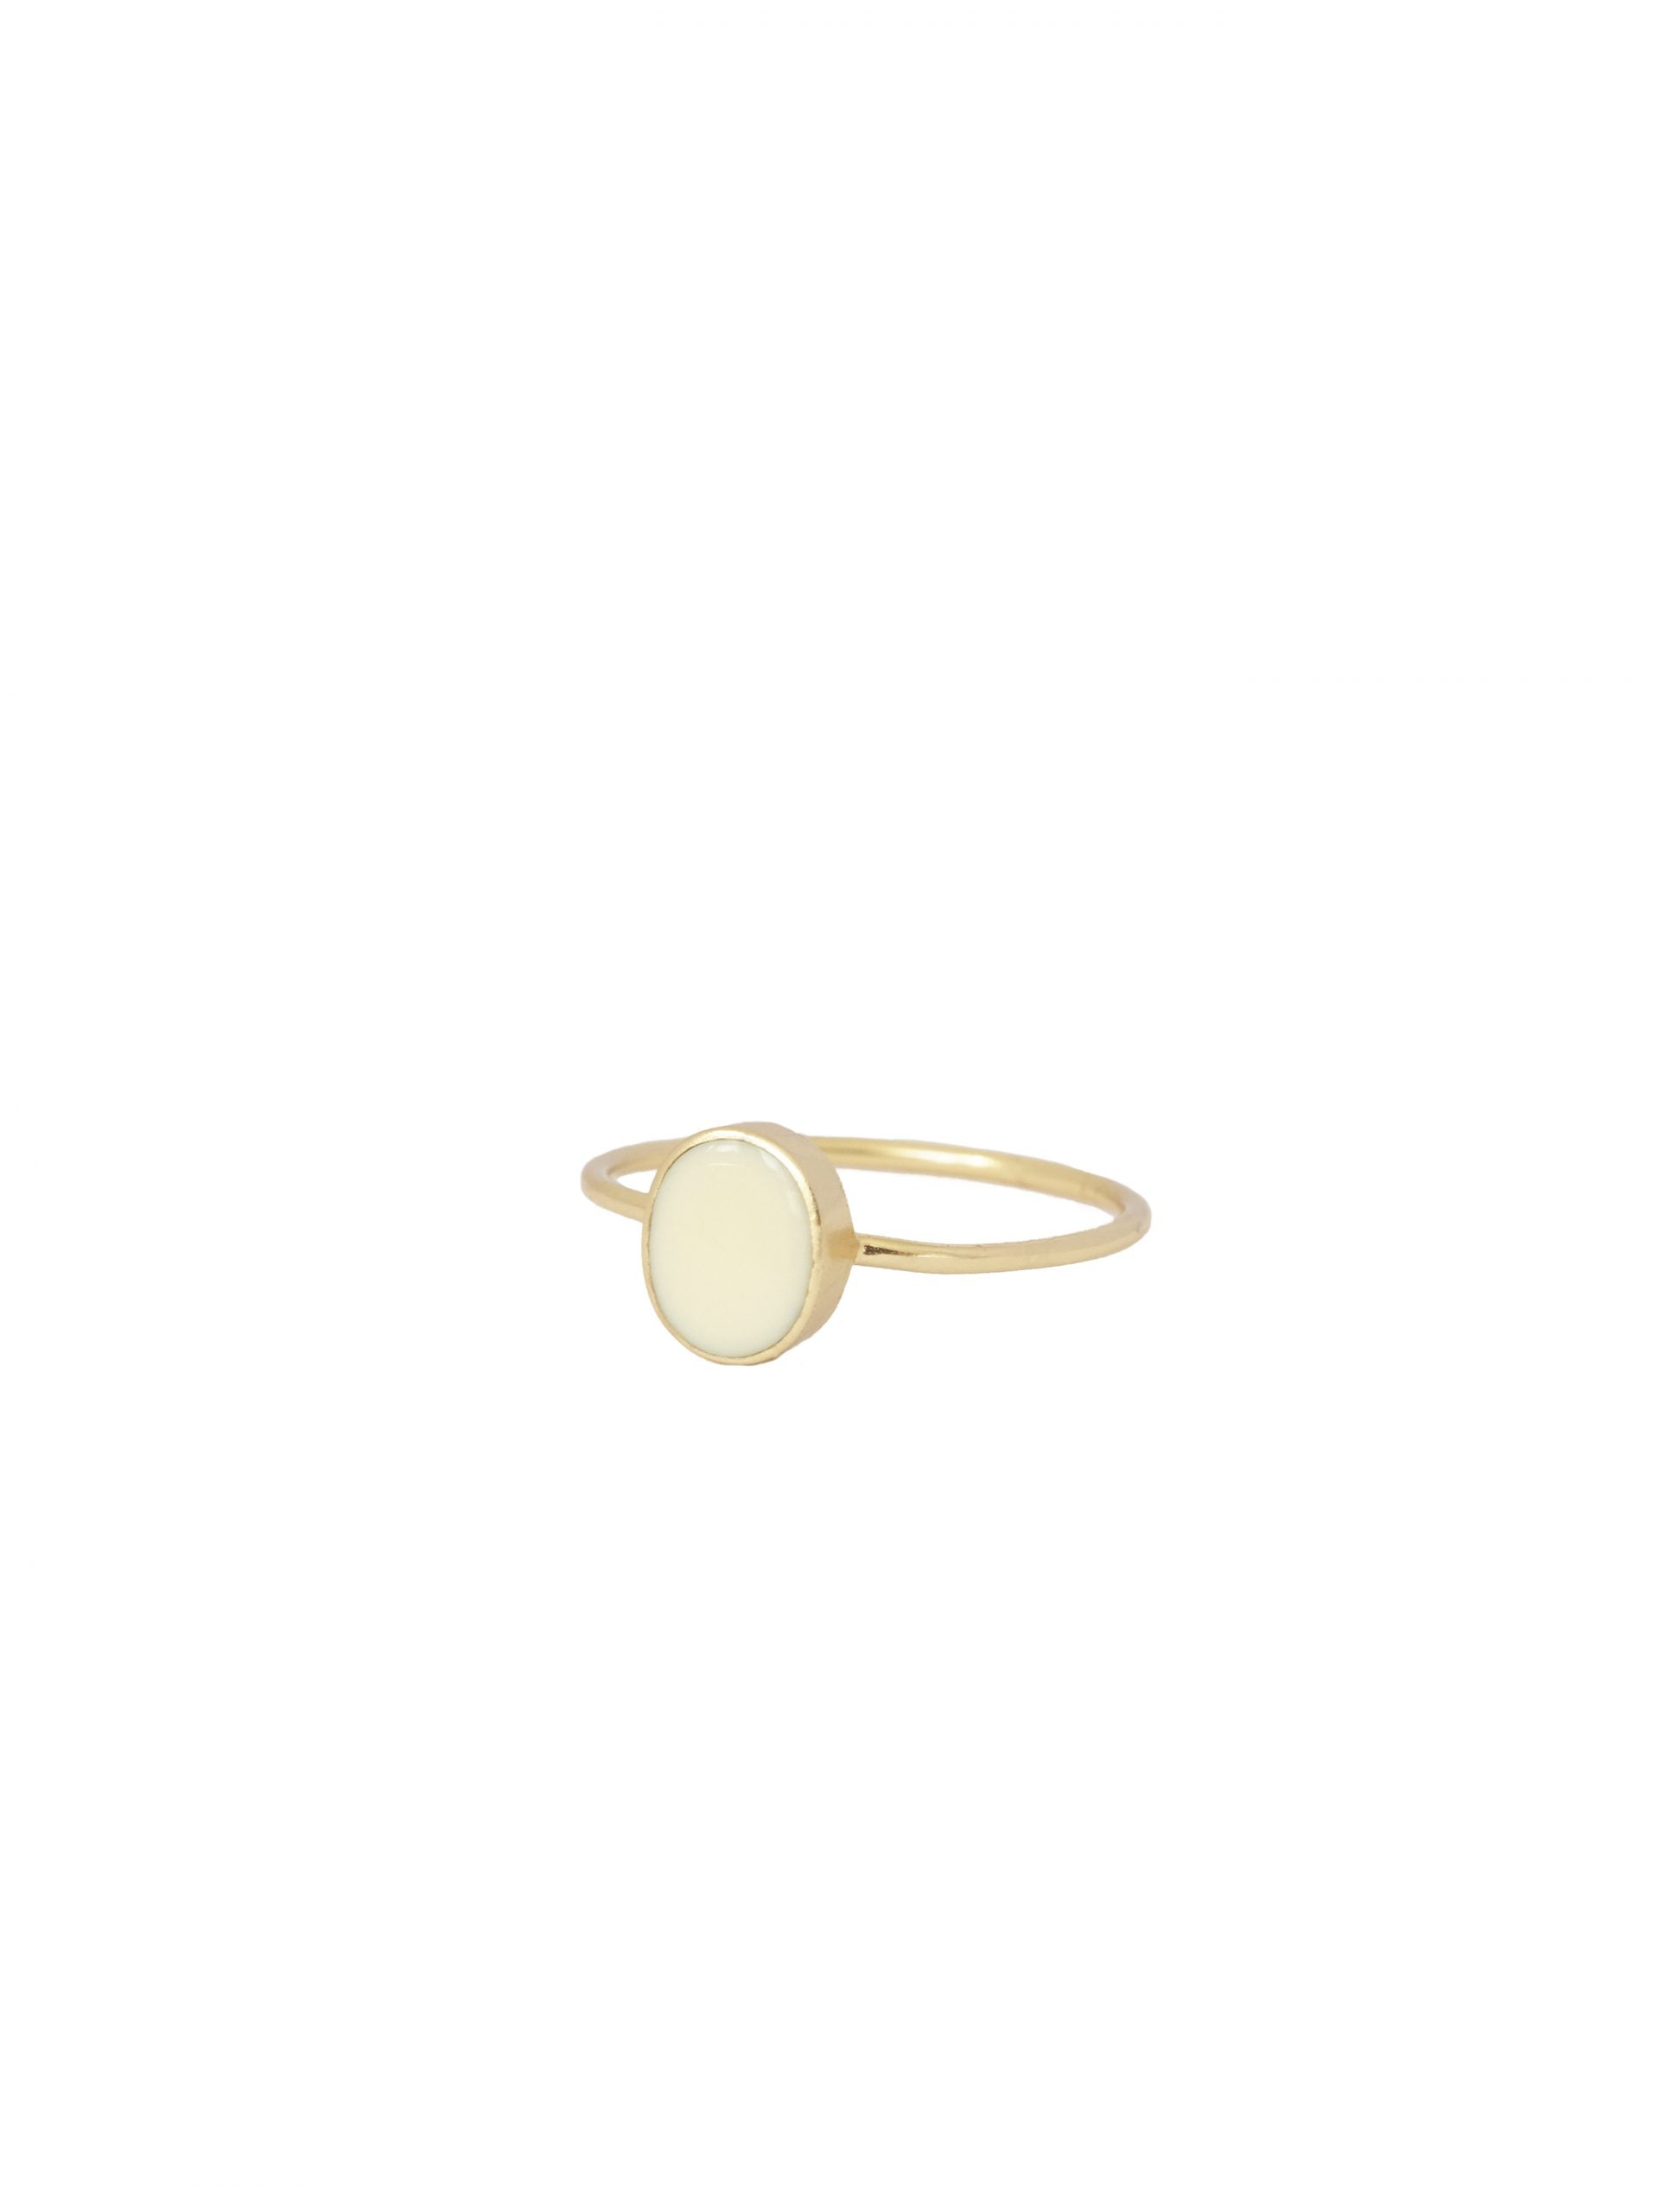 Petite Oval Creme Gold Ring